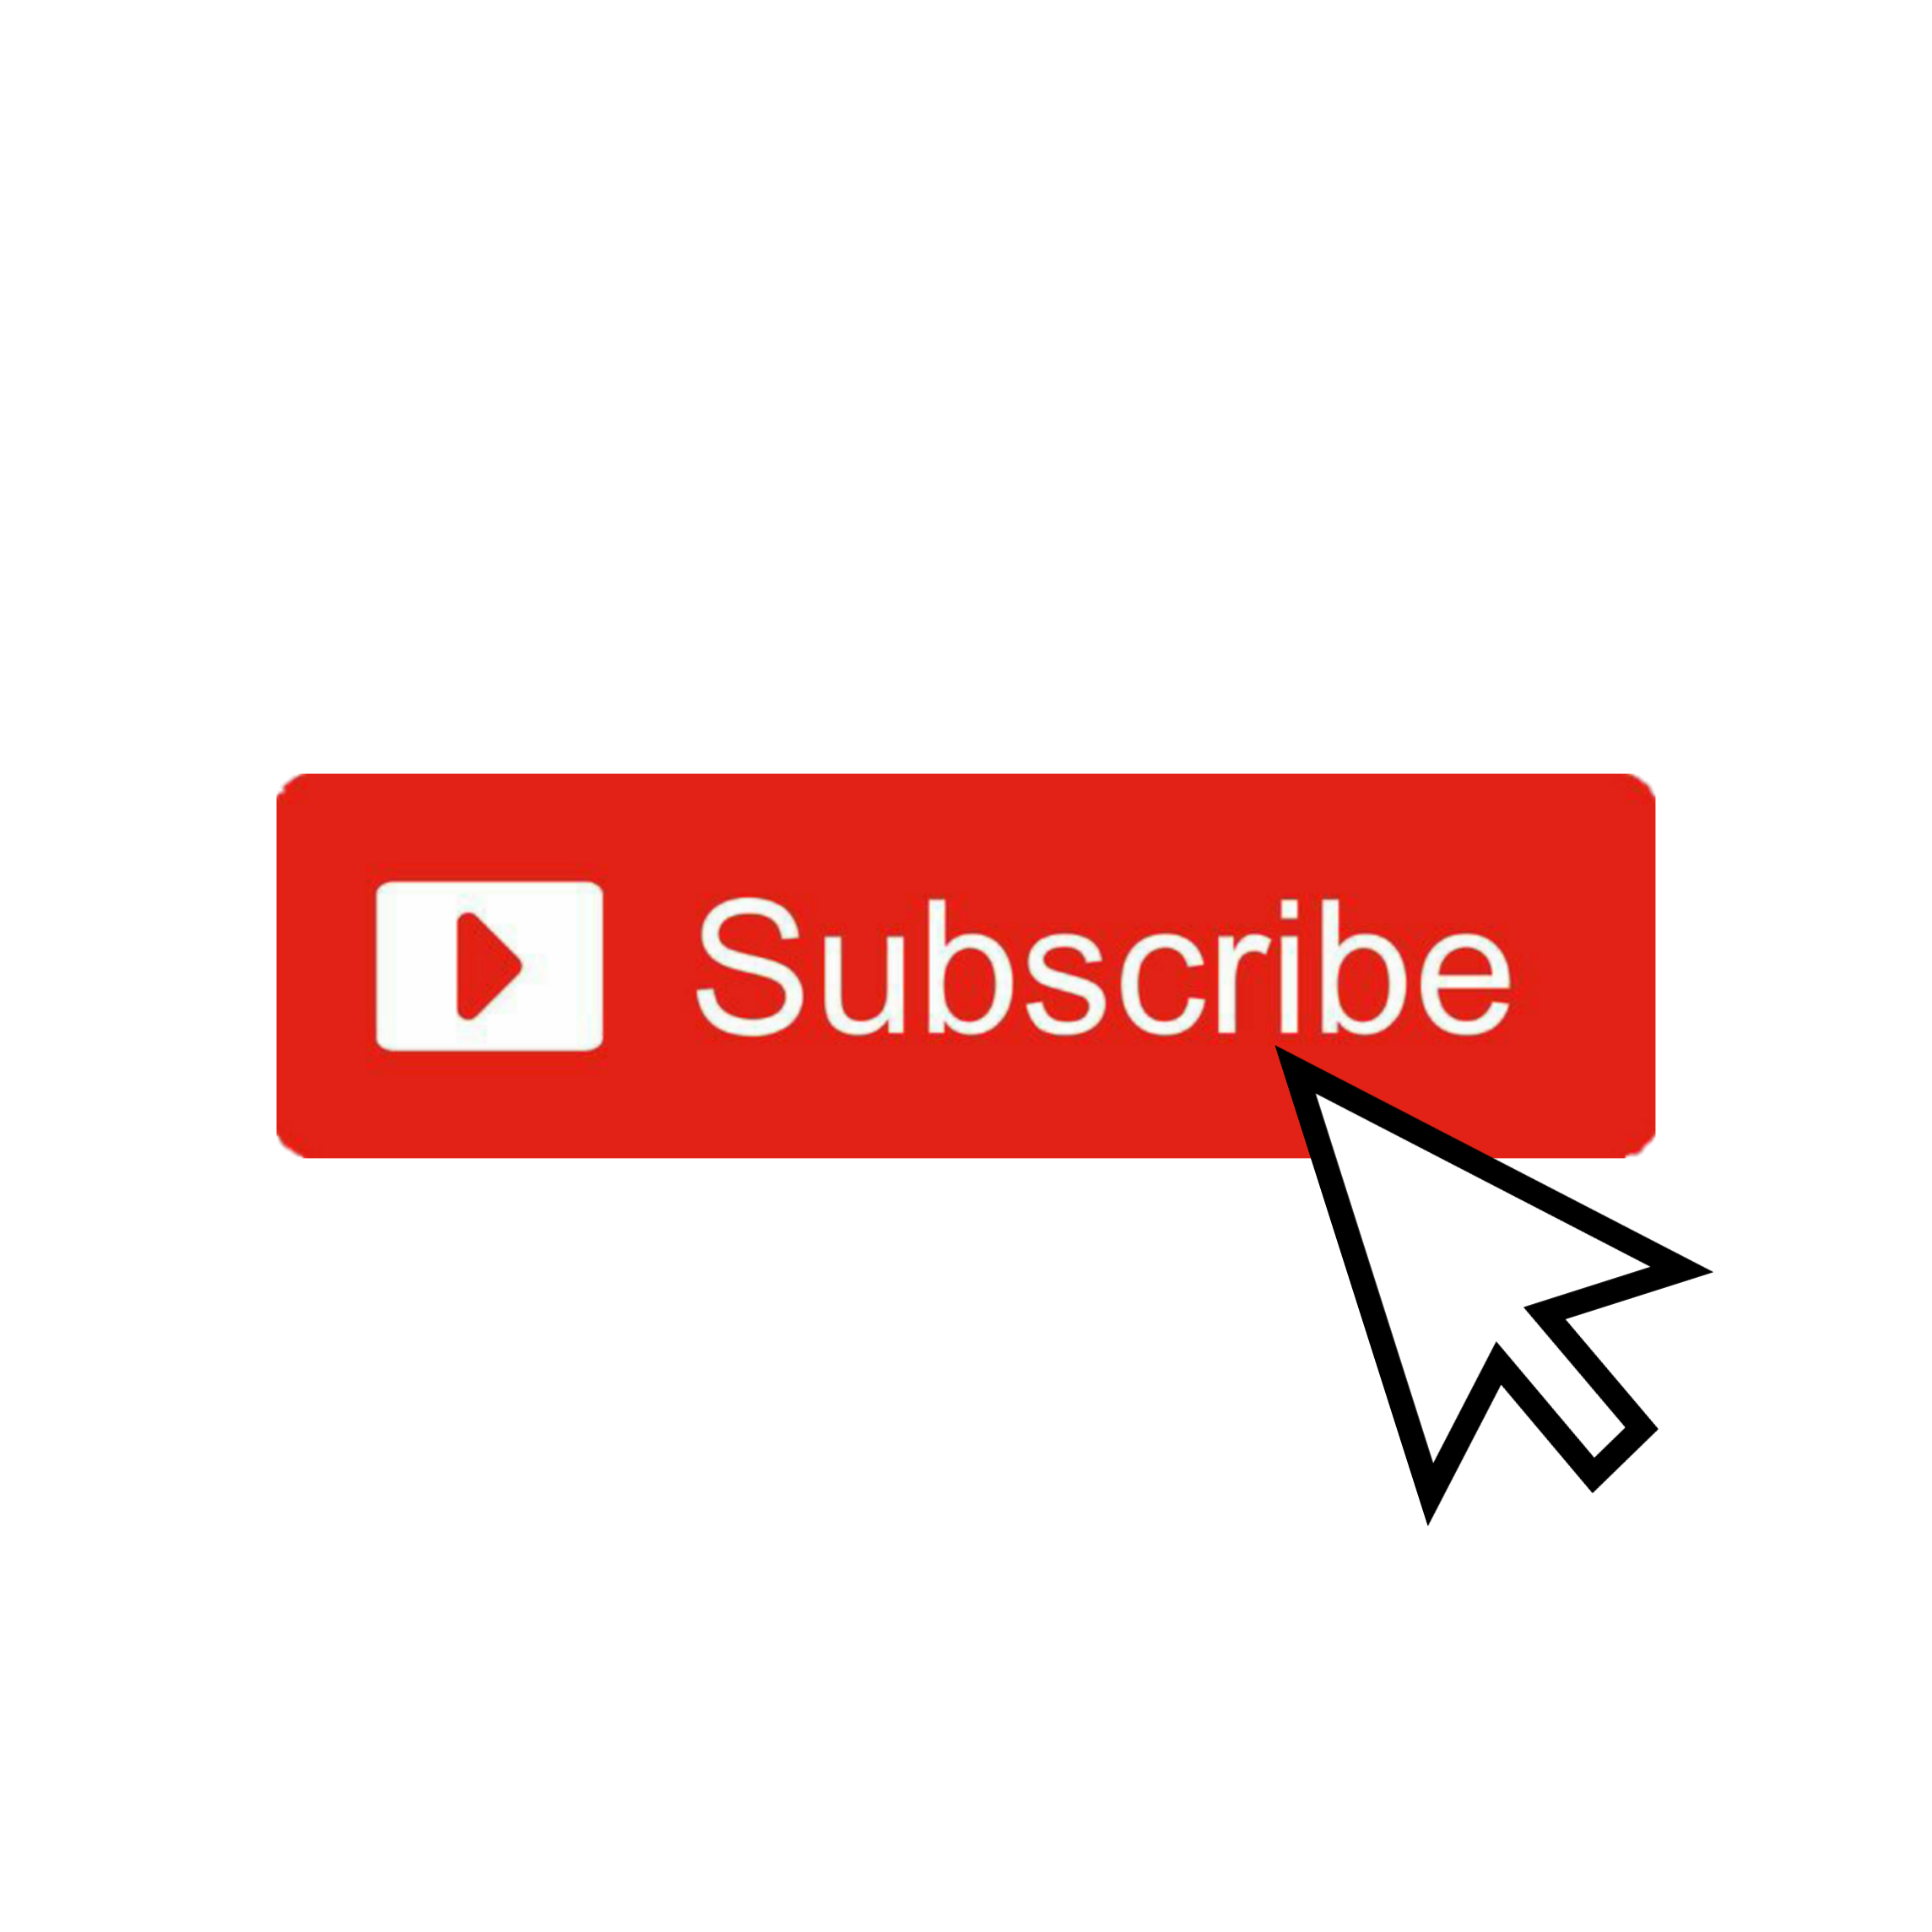 Download 33 Subscribe Logo Png Download